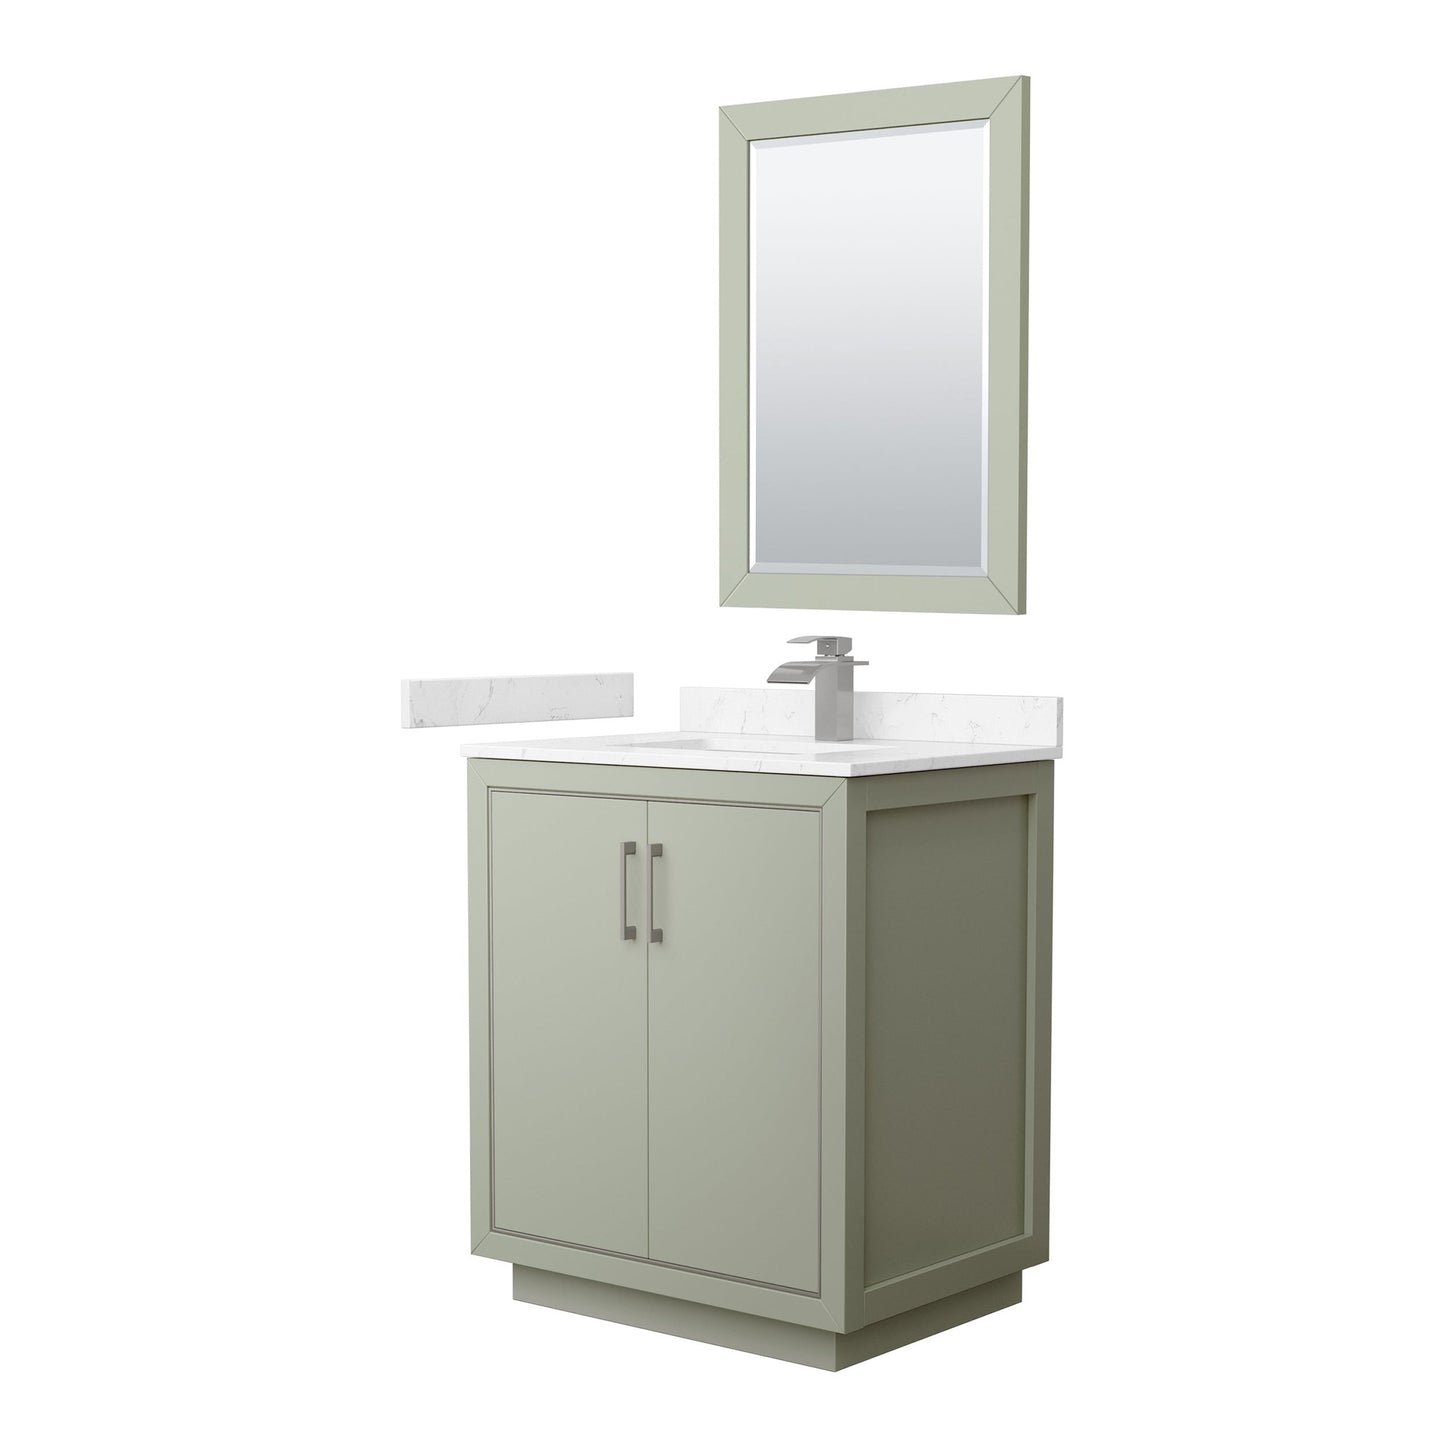 Wyndham Collection Icon 30" Single Bathroom Vanity in Light Green, Carrara Cultured Marble Countertop, Undermount Square Sink, Brushed Nickel Trim, 24" Mirror